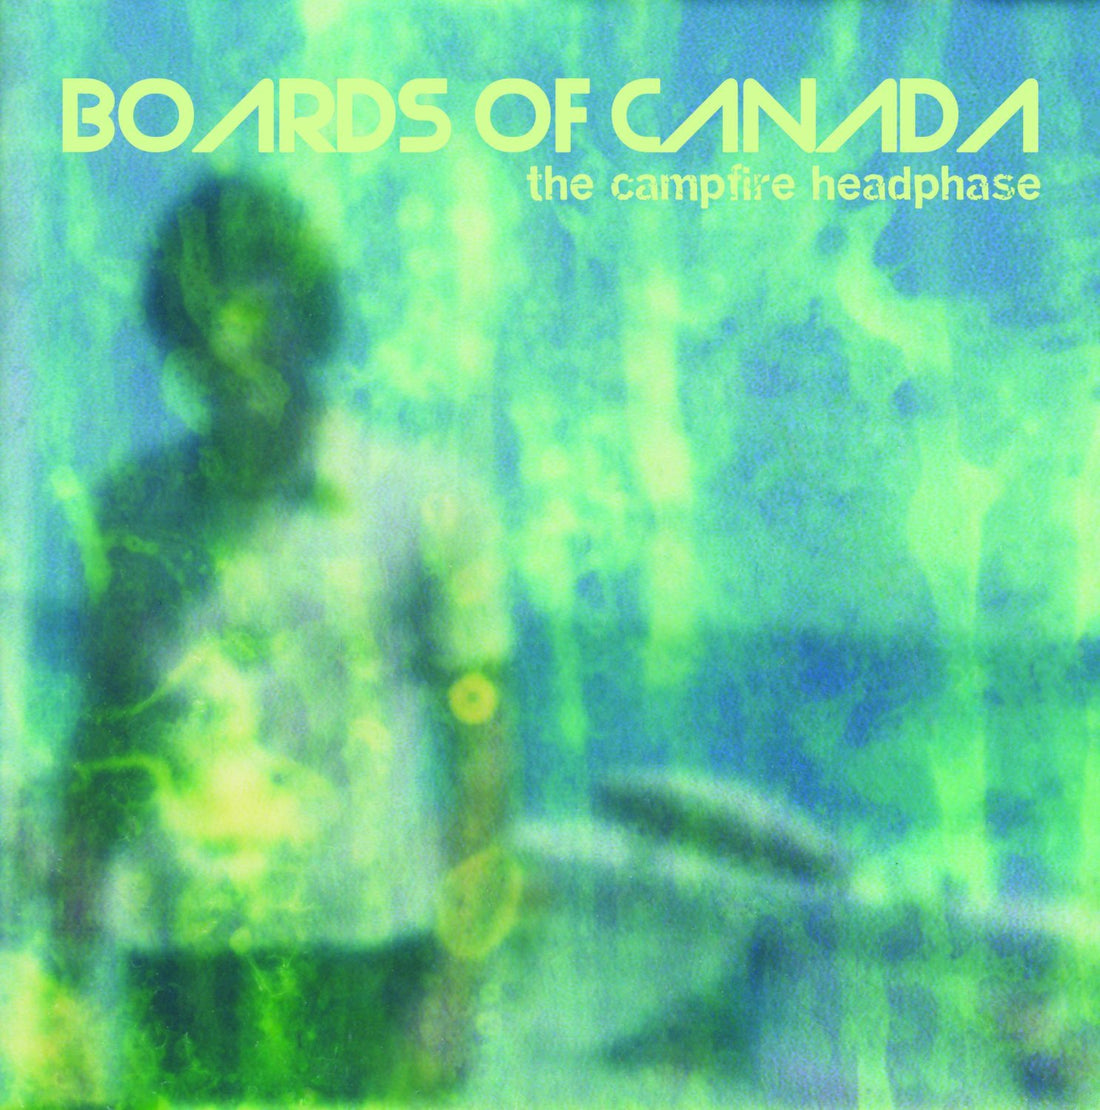 Boards of Canada- Campfire Headphase